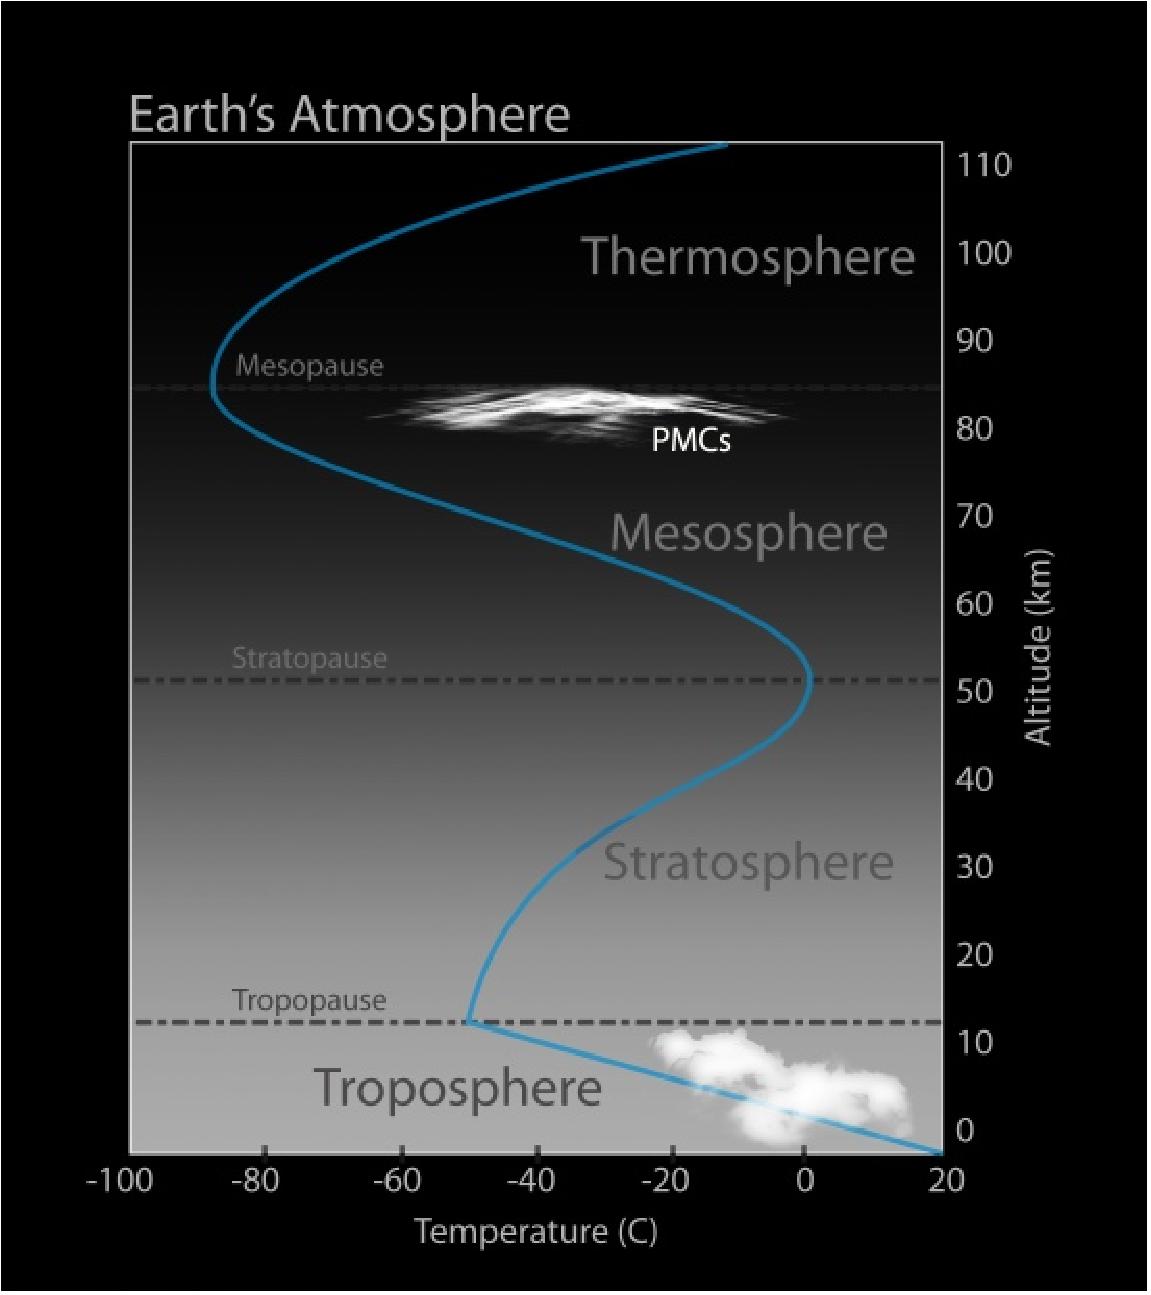 Figure 33: Temperature profile of the standard atmosphere (image credit: Emily Hill Design)